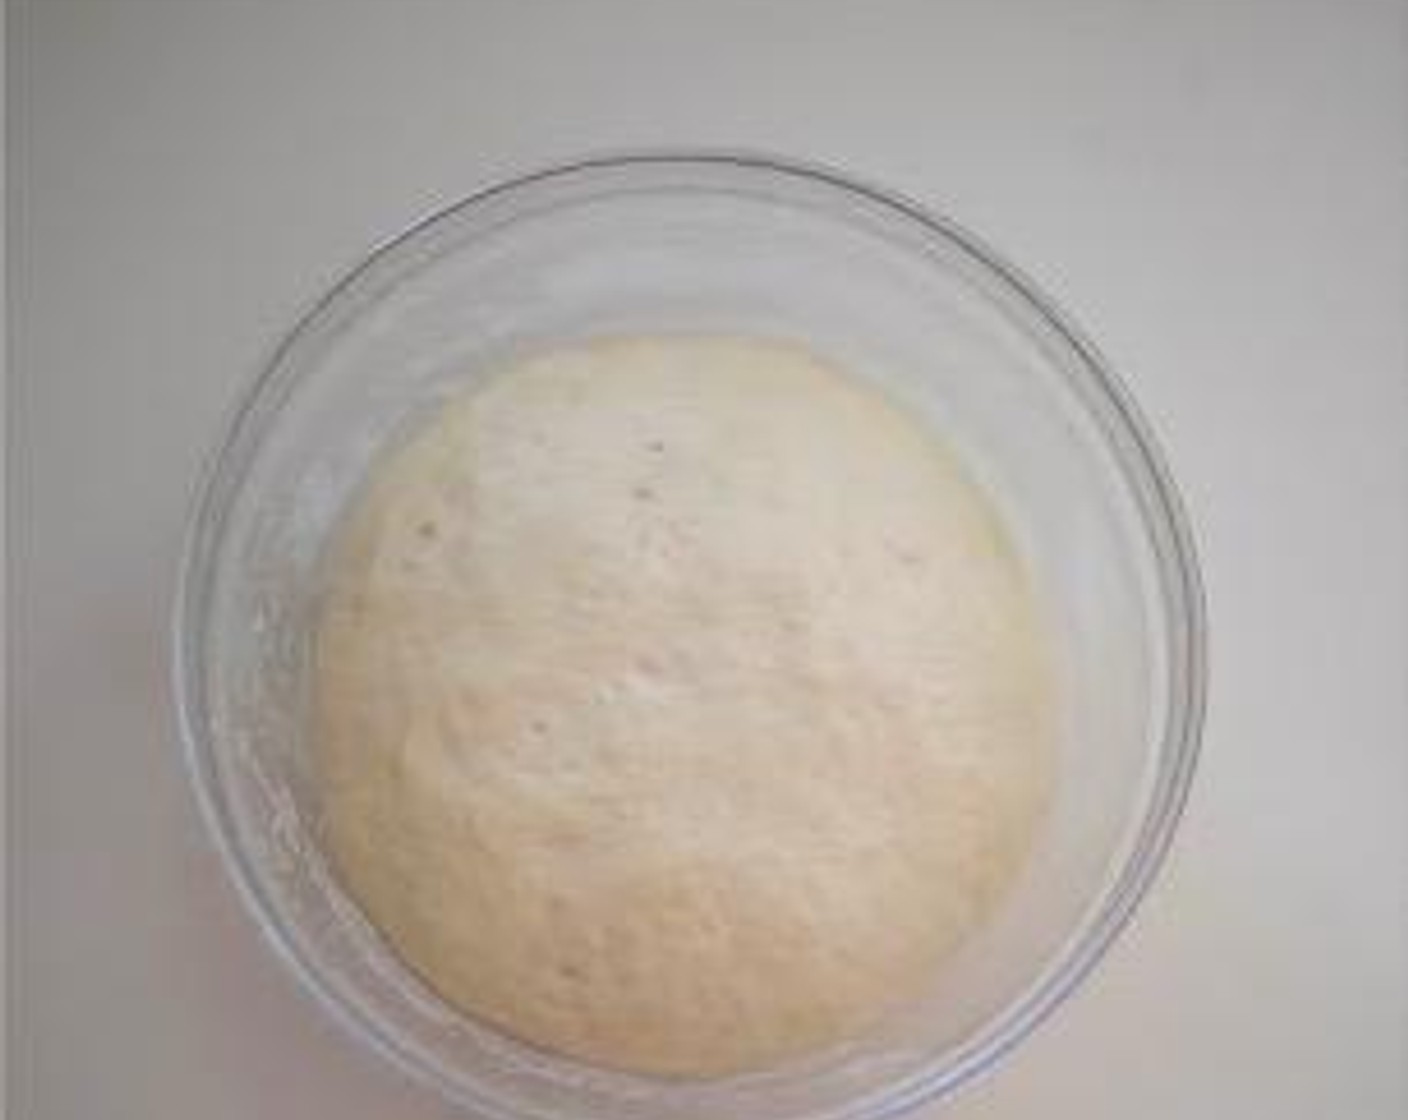 step 2 After 1 hour, place the dough into the refrigerator for at least 8 hours or up to 16 hours. Before using, take the sponge dough out of the refrigerator and return to room temperature.